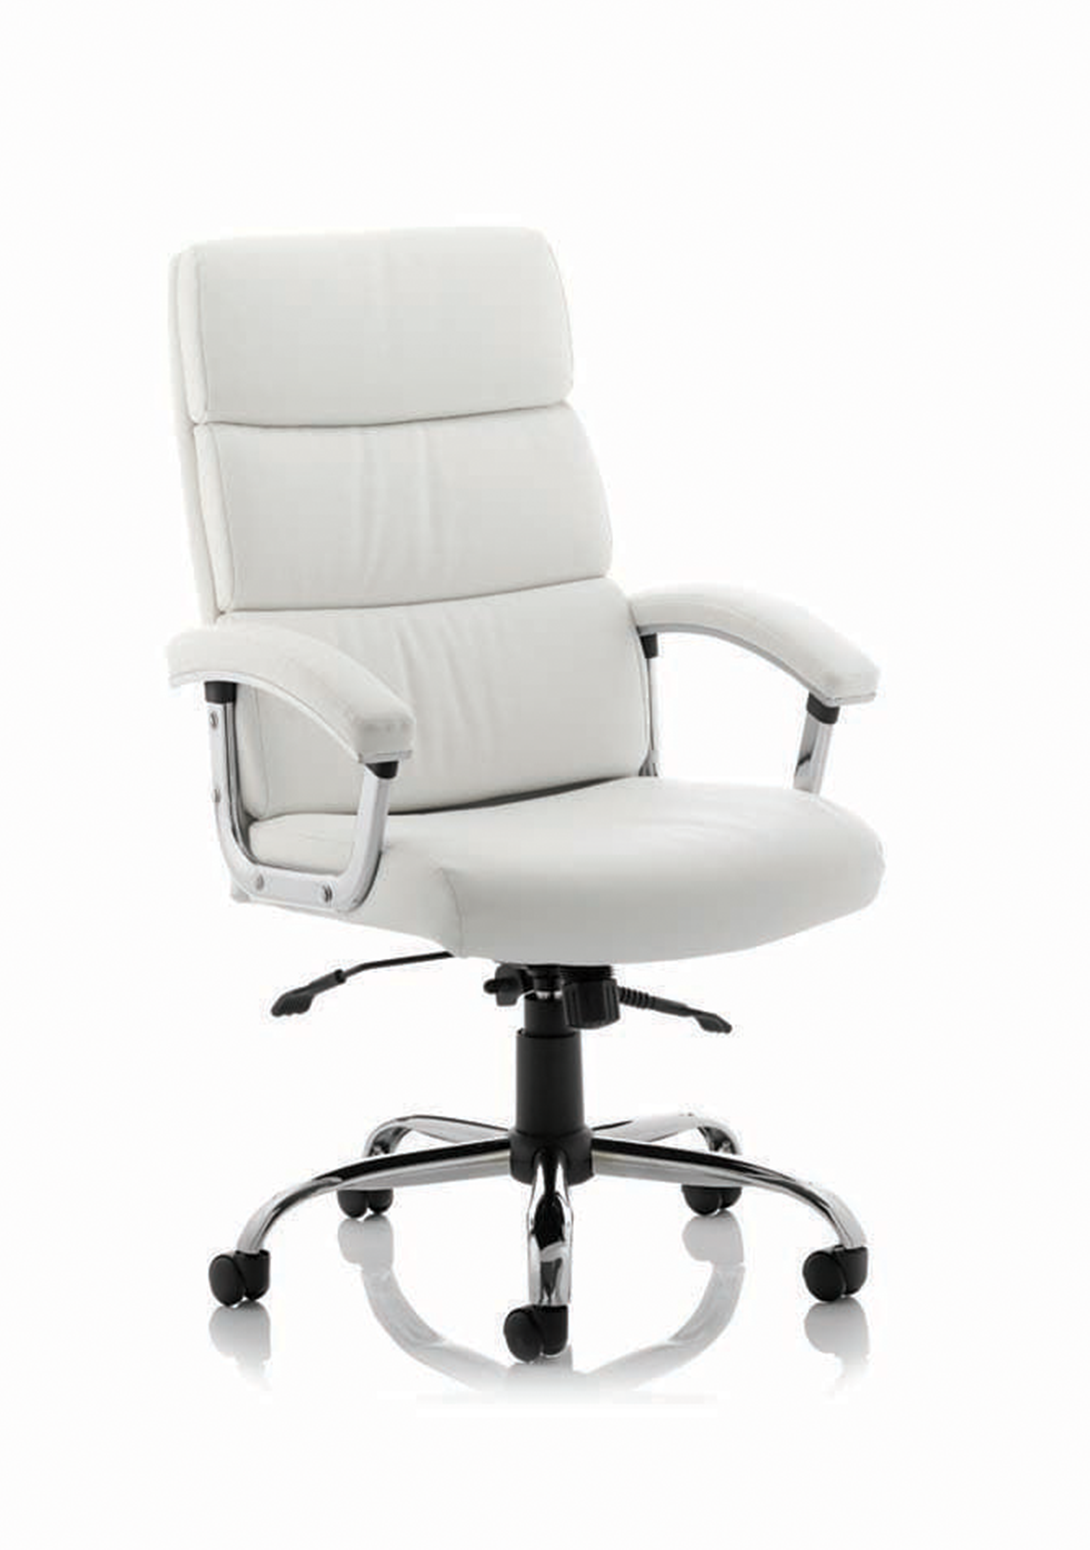 Desire Exec Home Office Chair | Executive Chair | Home Office Furniture | Padded Soft Chair | Leather Executive Chair | Leather Home Office Chair | Swivel Office Chair